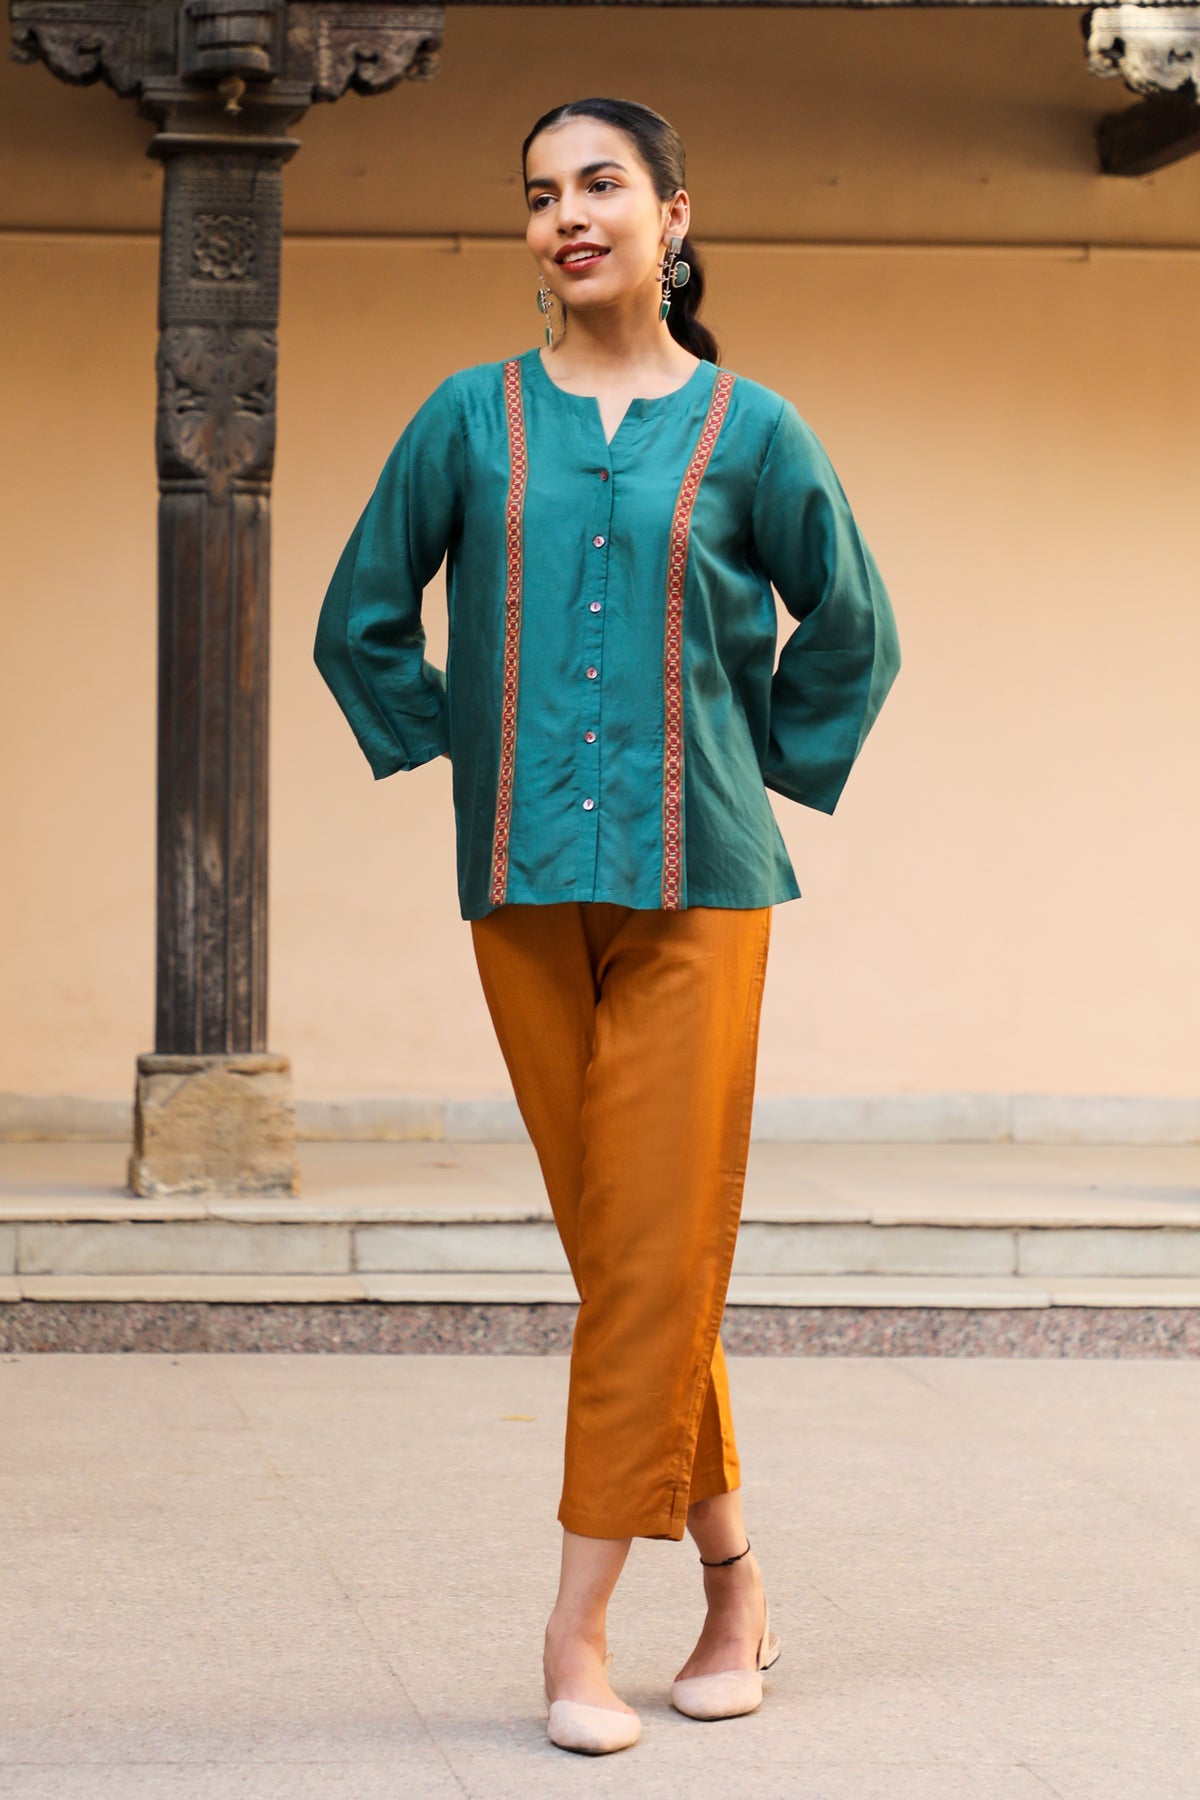 Juhi Teal Green Shirt With Crewel Embroidery